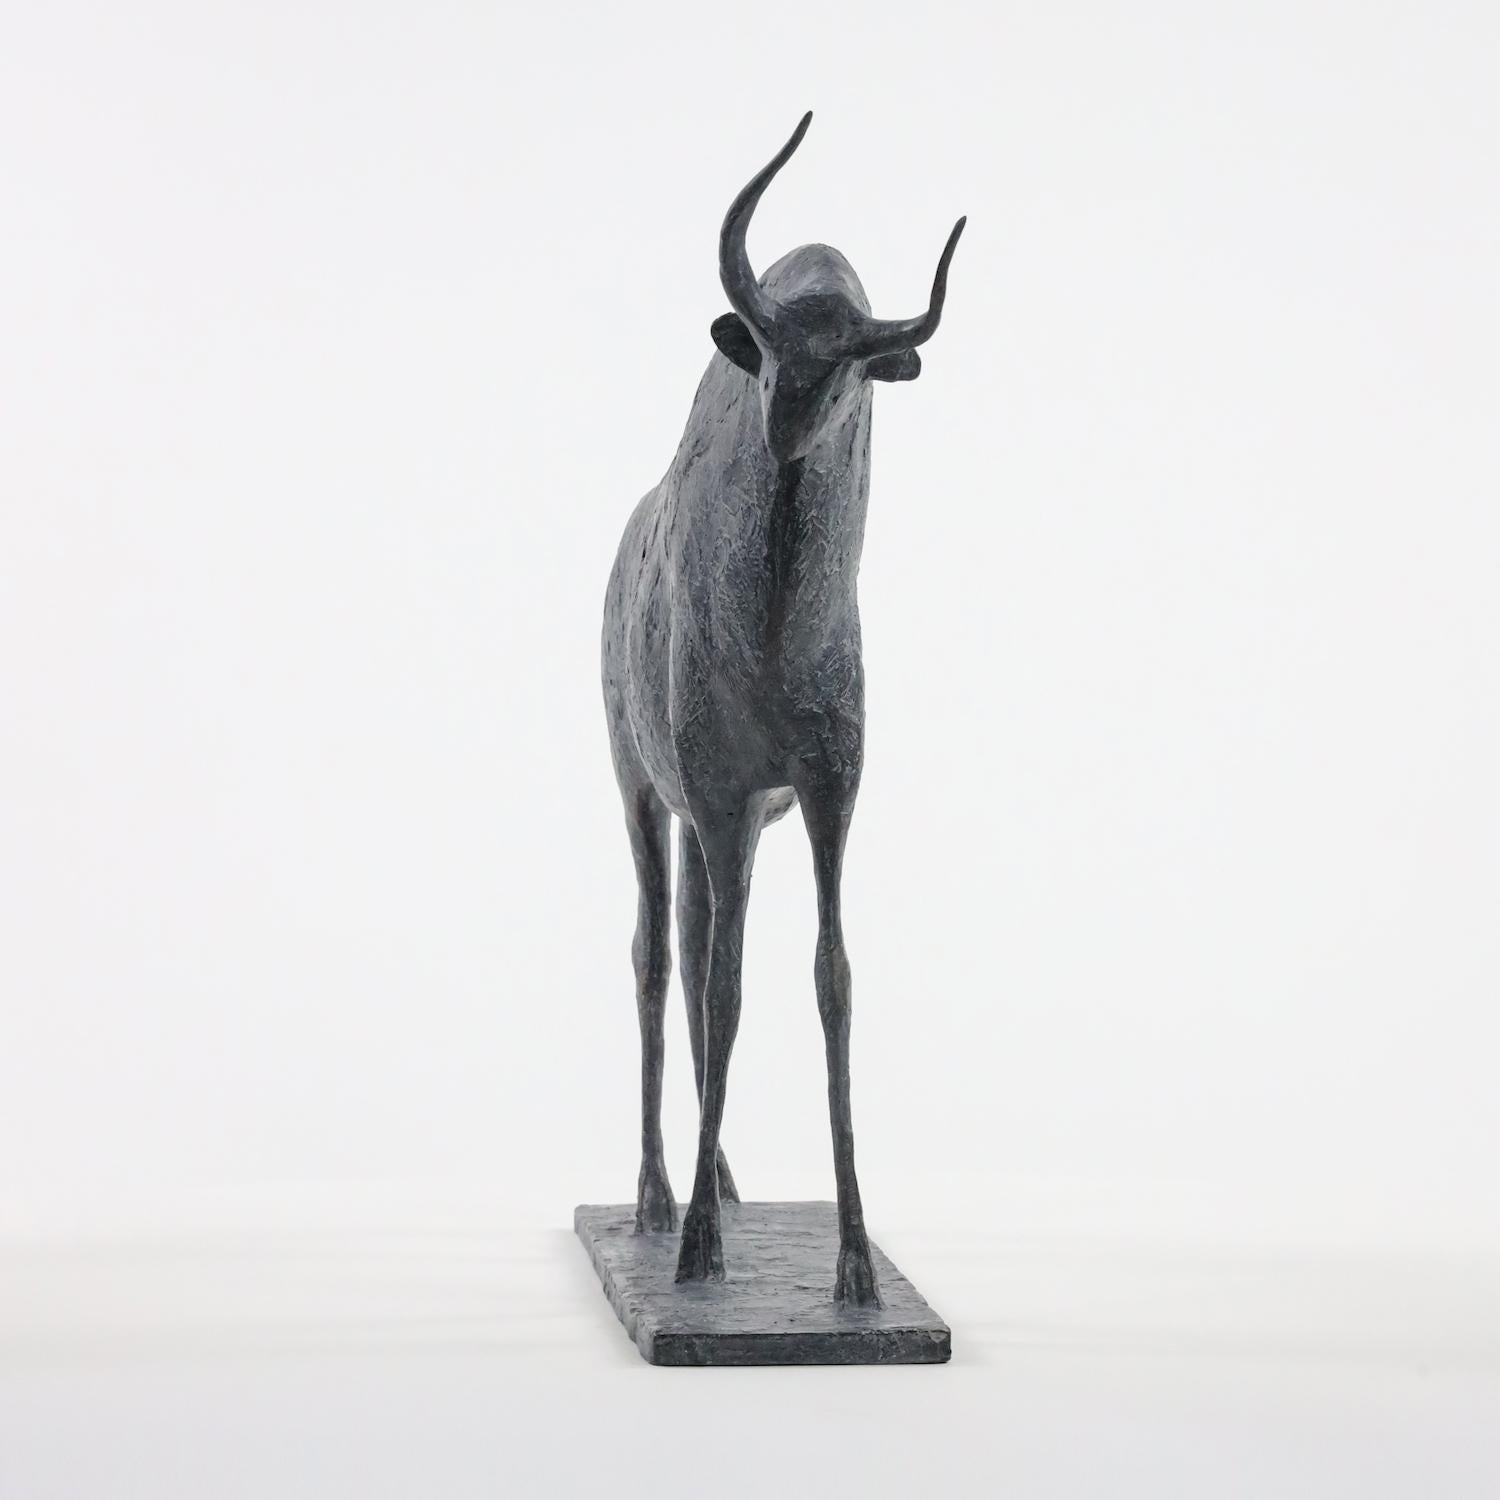 Small Bull I (2020), bronze sculpture by French contemporary artist Pierre Yermia.
45 cm × 51 cm × 12 cm. This sculpture is signed and numbered. Edition of 8 & 4 A.P.
